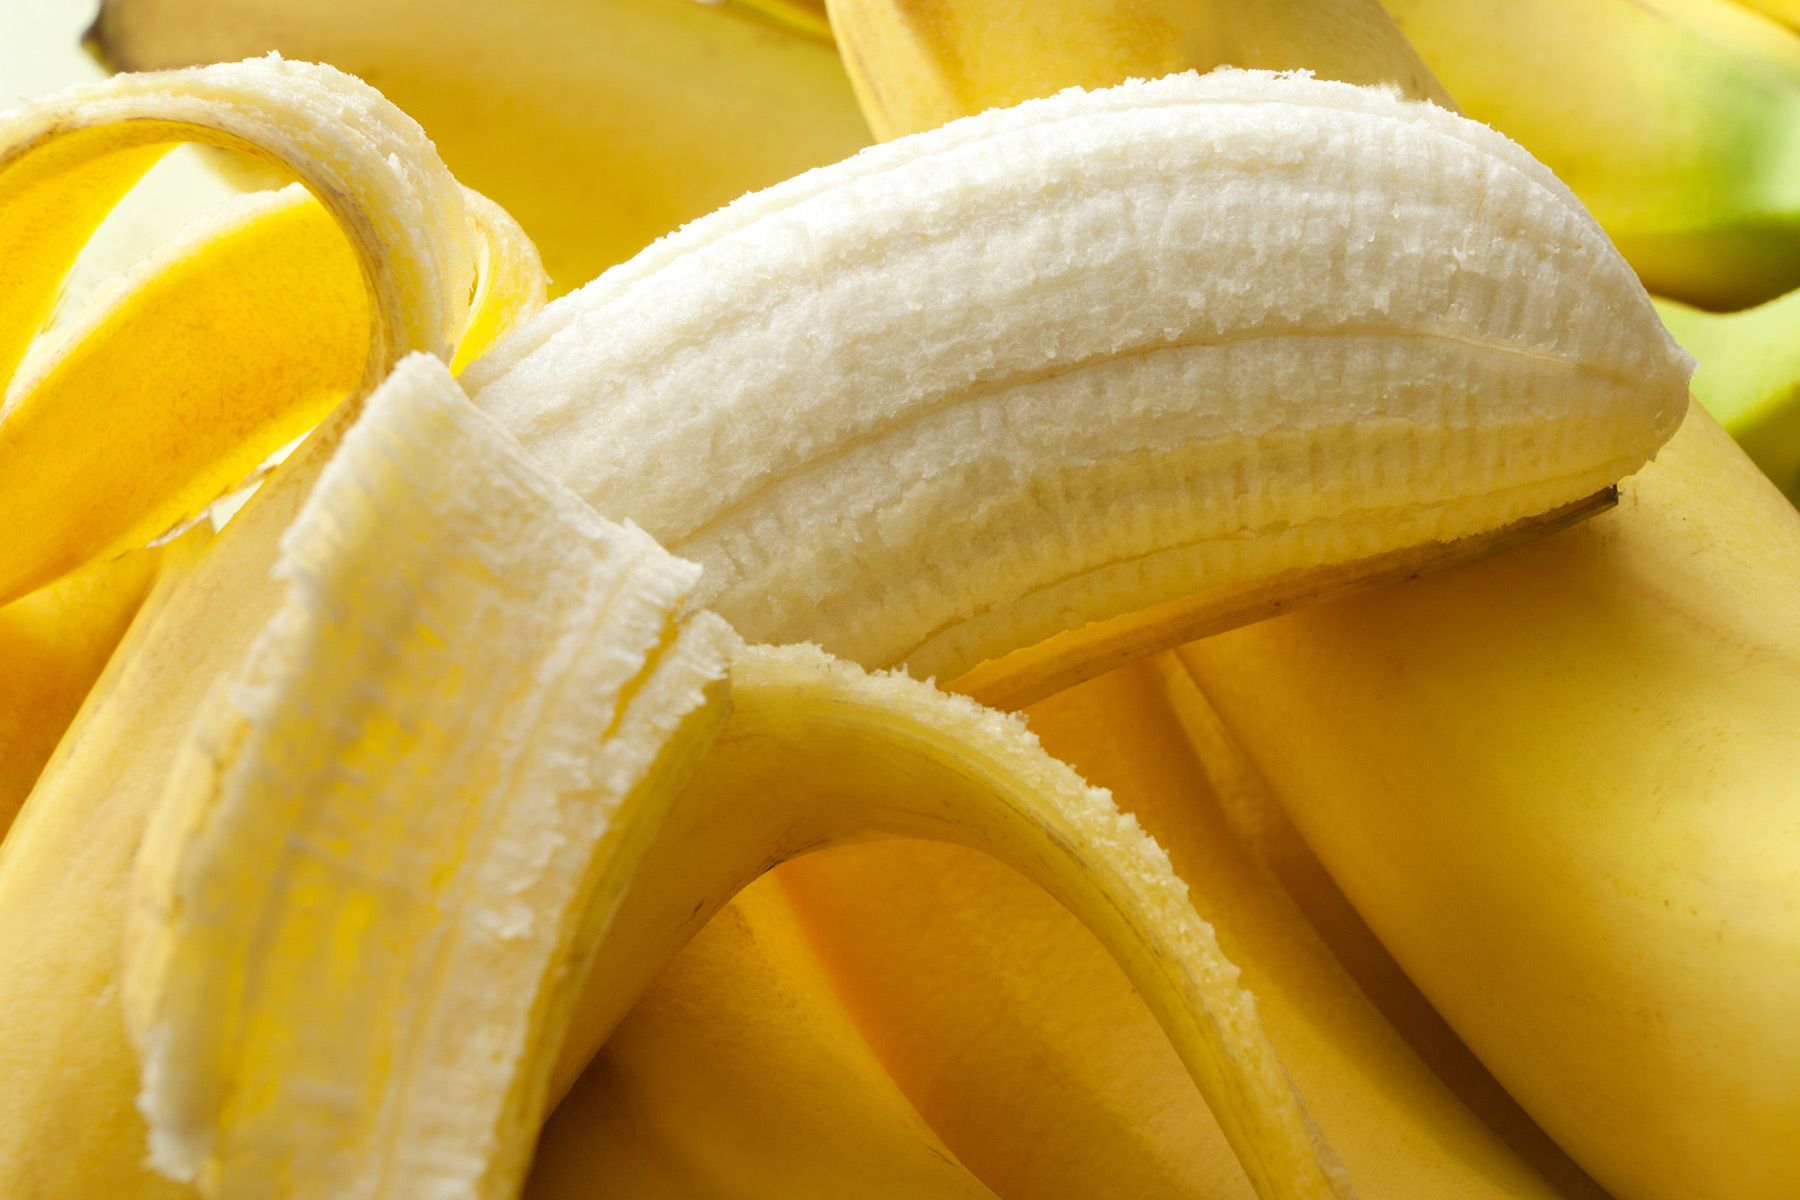 Are bananas good for you?